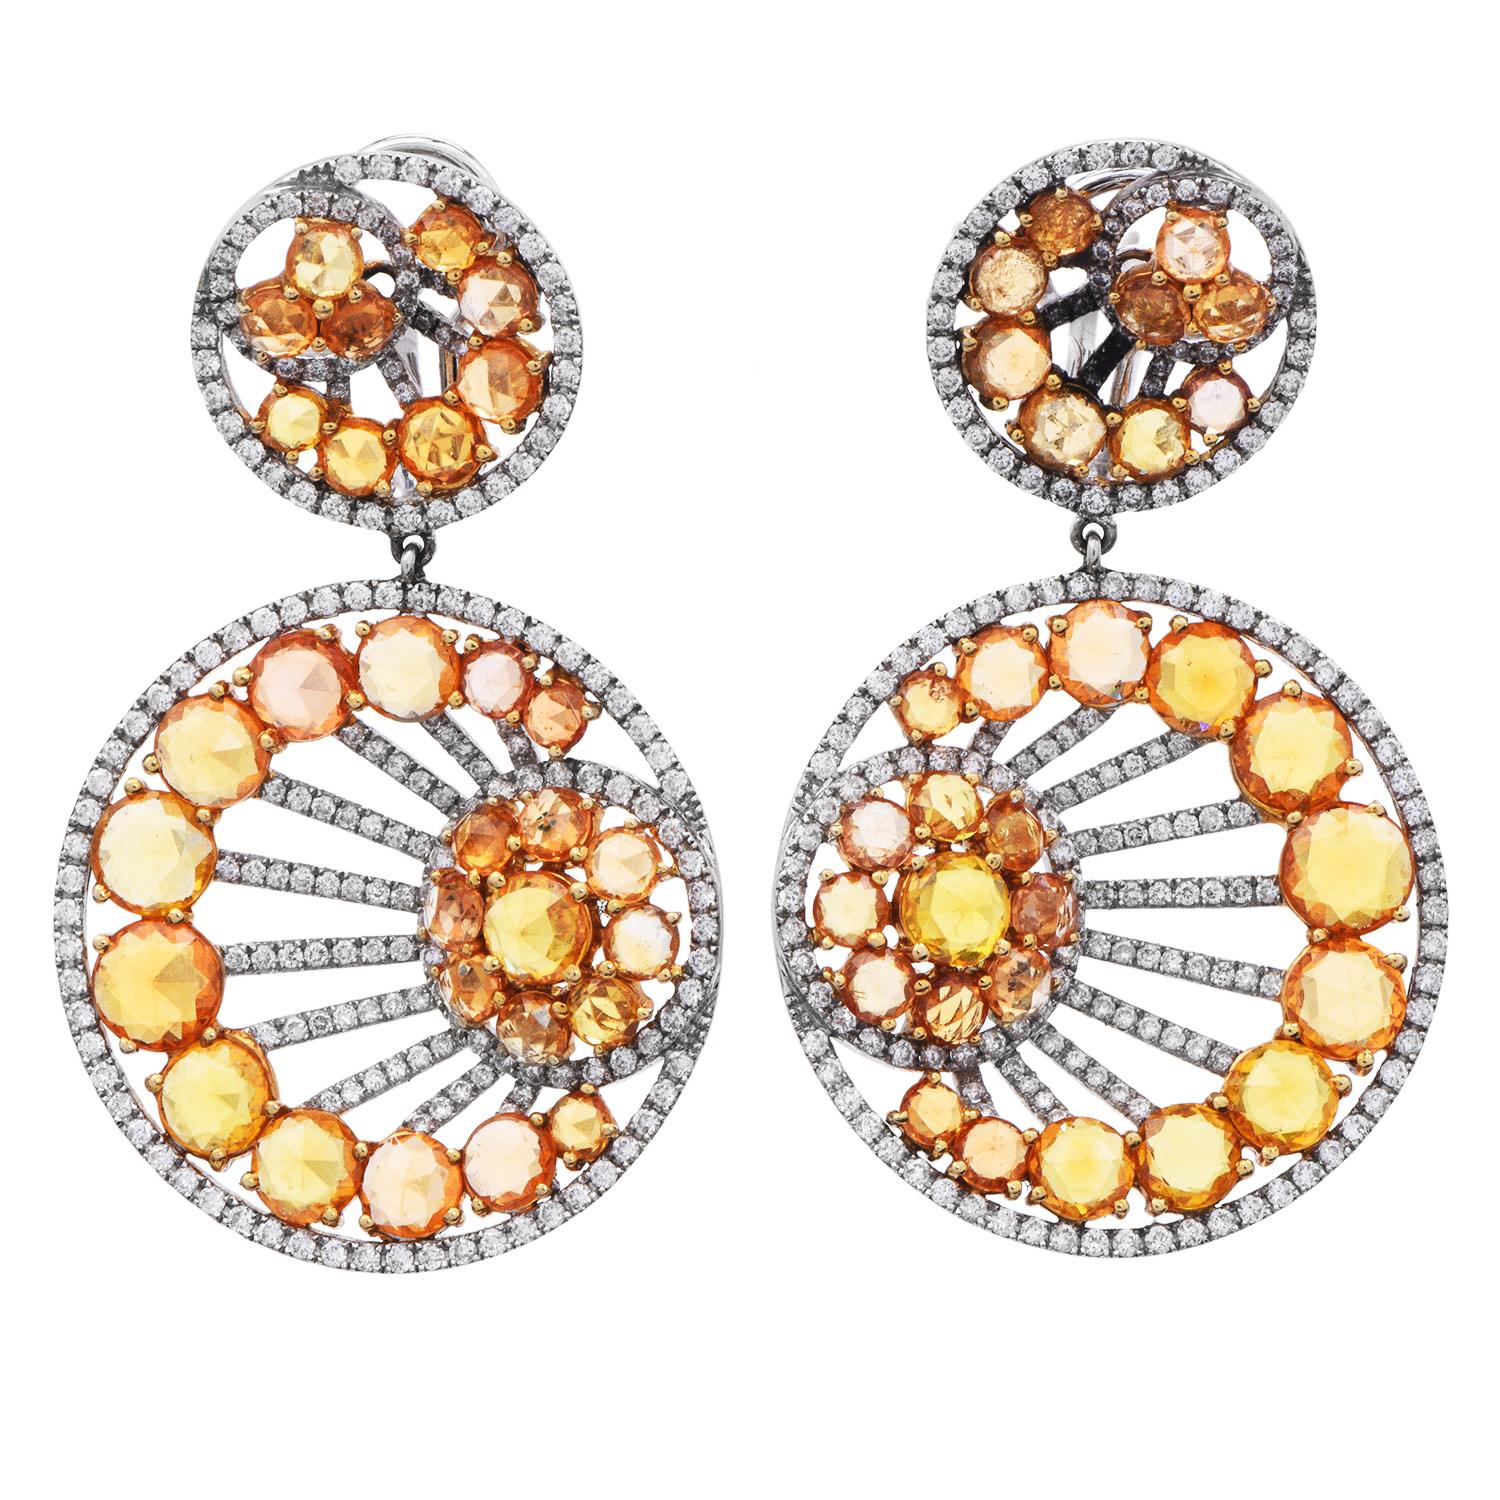 Sunny side up, with a touch of sparkle and luxury!

These lovely happy earrings are crafted in 18K white and yellow gold.

They feature a dance of round-cut white diamond paves set all over the piece, set with approx. 394 round brilliant cut diamond